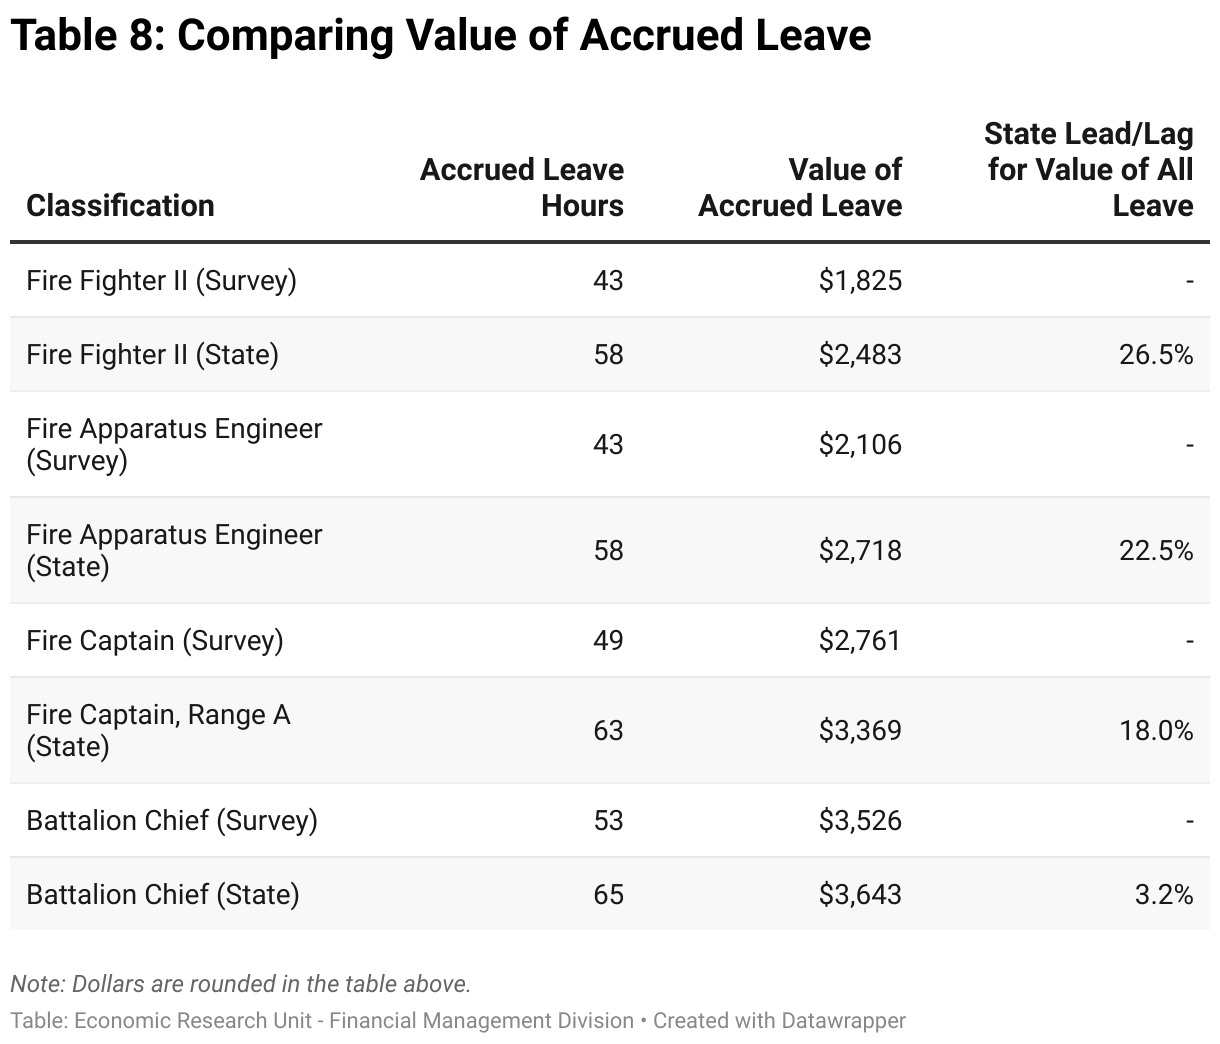 This table compares the monthly accrued leave hours and the value of those leave hours for all the local jurisdictions in our survey and CAL FIRE across all classifications. The survey average monthly accrued leave hours and value of those leave hours for each classification are as follows: Firefighter II: 43 hours ($1,825), Fire Apparatus Engineer: 43 hours ($2,106), Fire Captain: 49 hours ($2,761), and Battalion Chief: 53 hours ($3,526). The monthly accrued leave hours and value of those leave hours for each State classification are as follows: Firefighter II: 58 hours ($2,483), Fire Apparatus Engineer: 58 hours ($2,718), Fire Captain, Range A: 63 hours ($3,369), and Battalion Chief: 65 hours ($3,643). The State lead/lag for value of all leave are as follows: Firefighter II: 26.5%, Fire Apparatus Engineer: 22.5%, Fire Captain, Range A: 18.0%, and Battalion Chief: 3.2%.